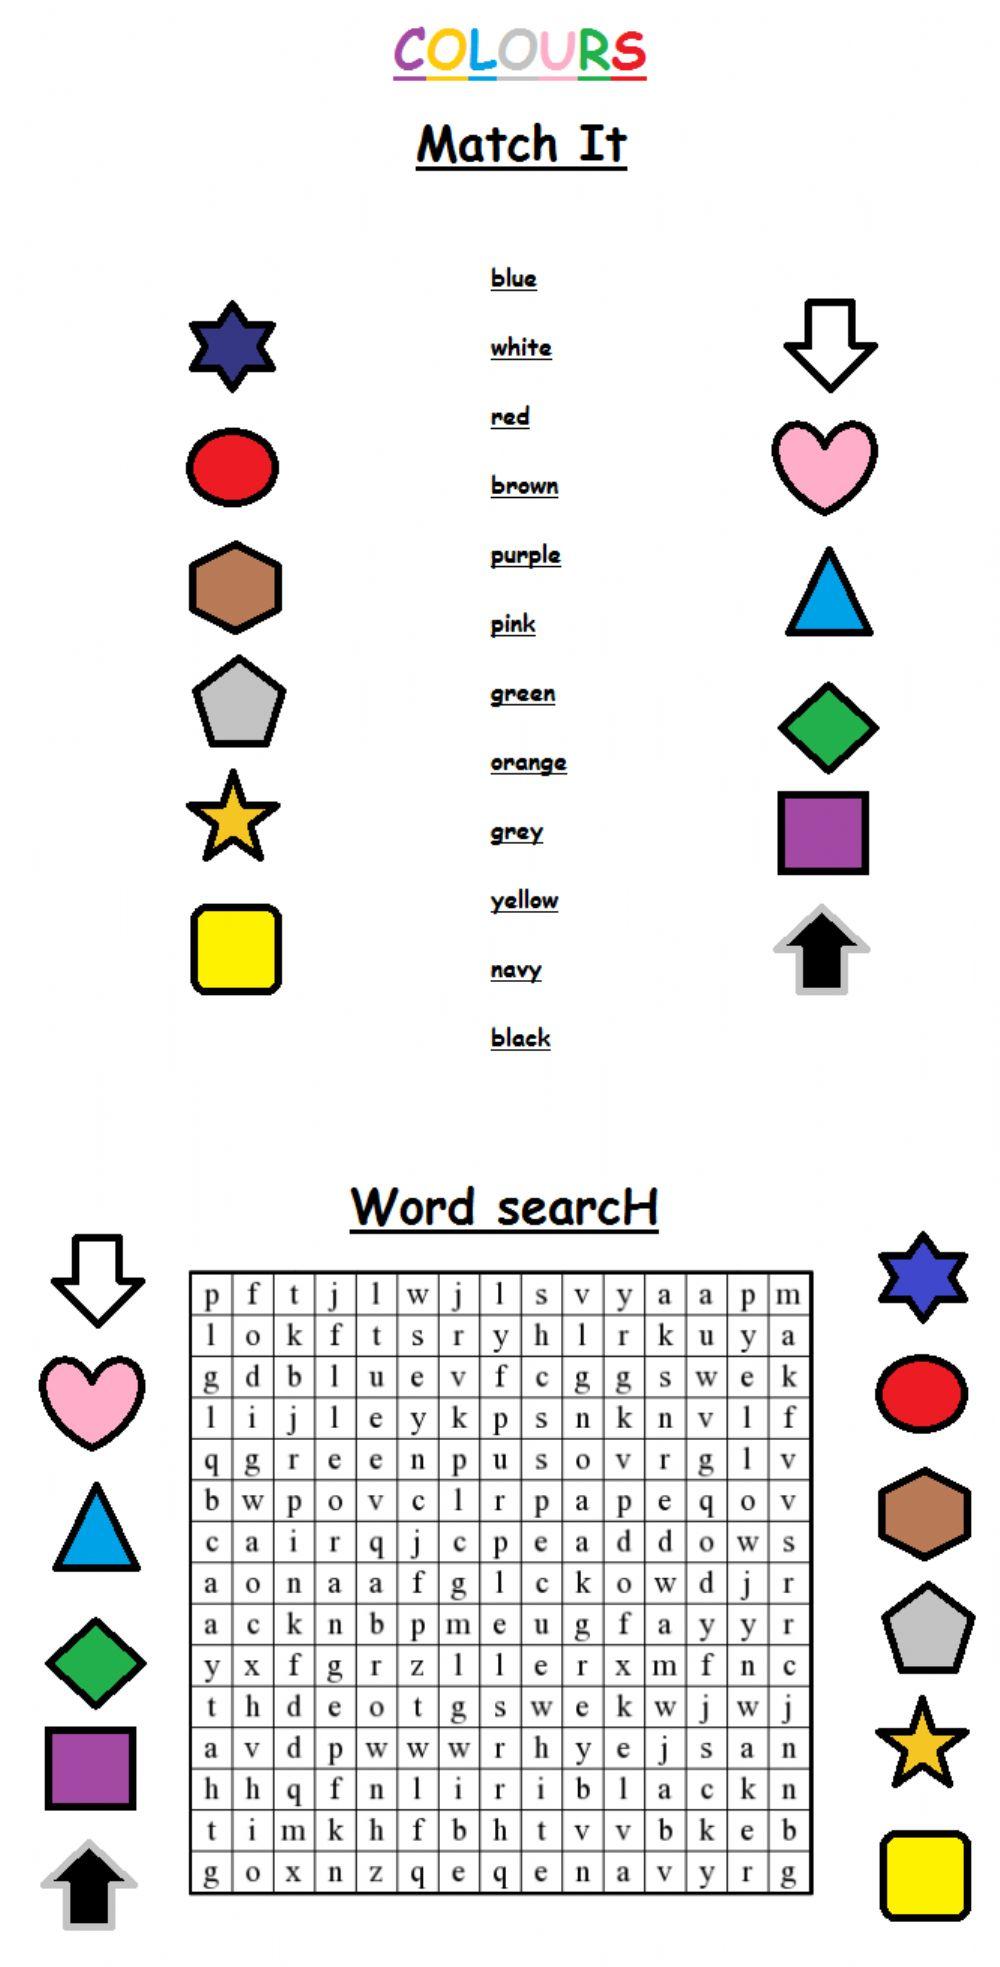 Colours, wordsearch and match